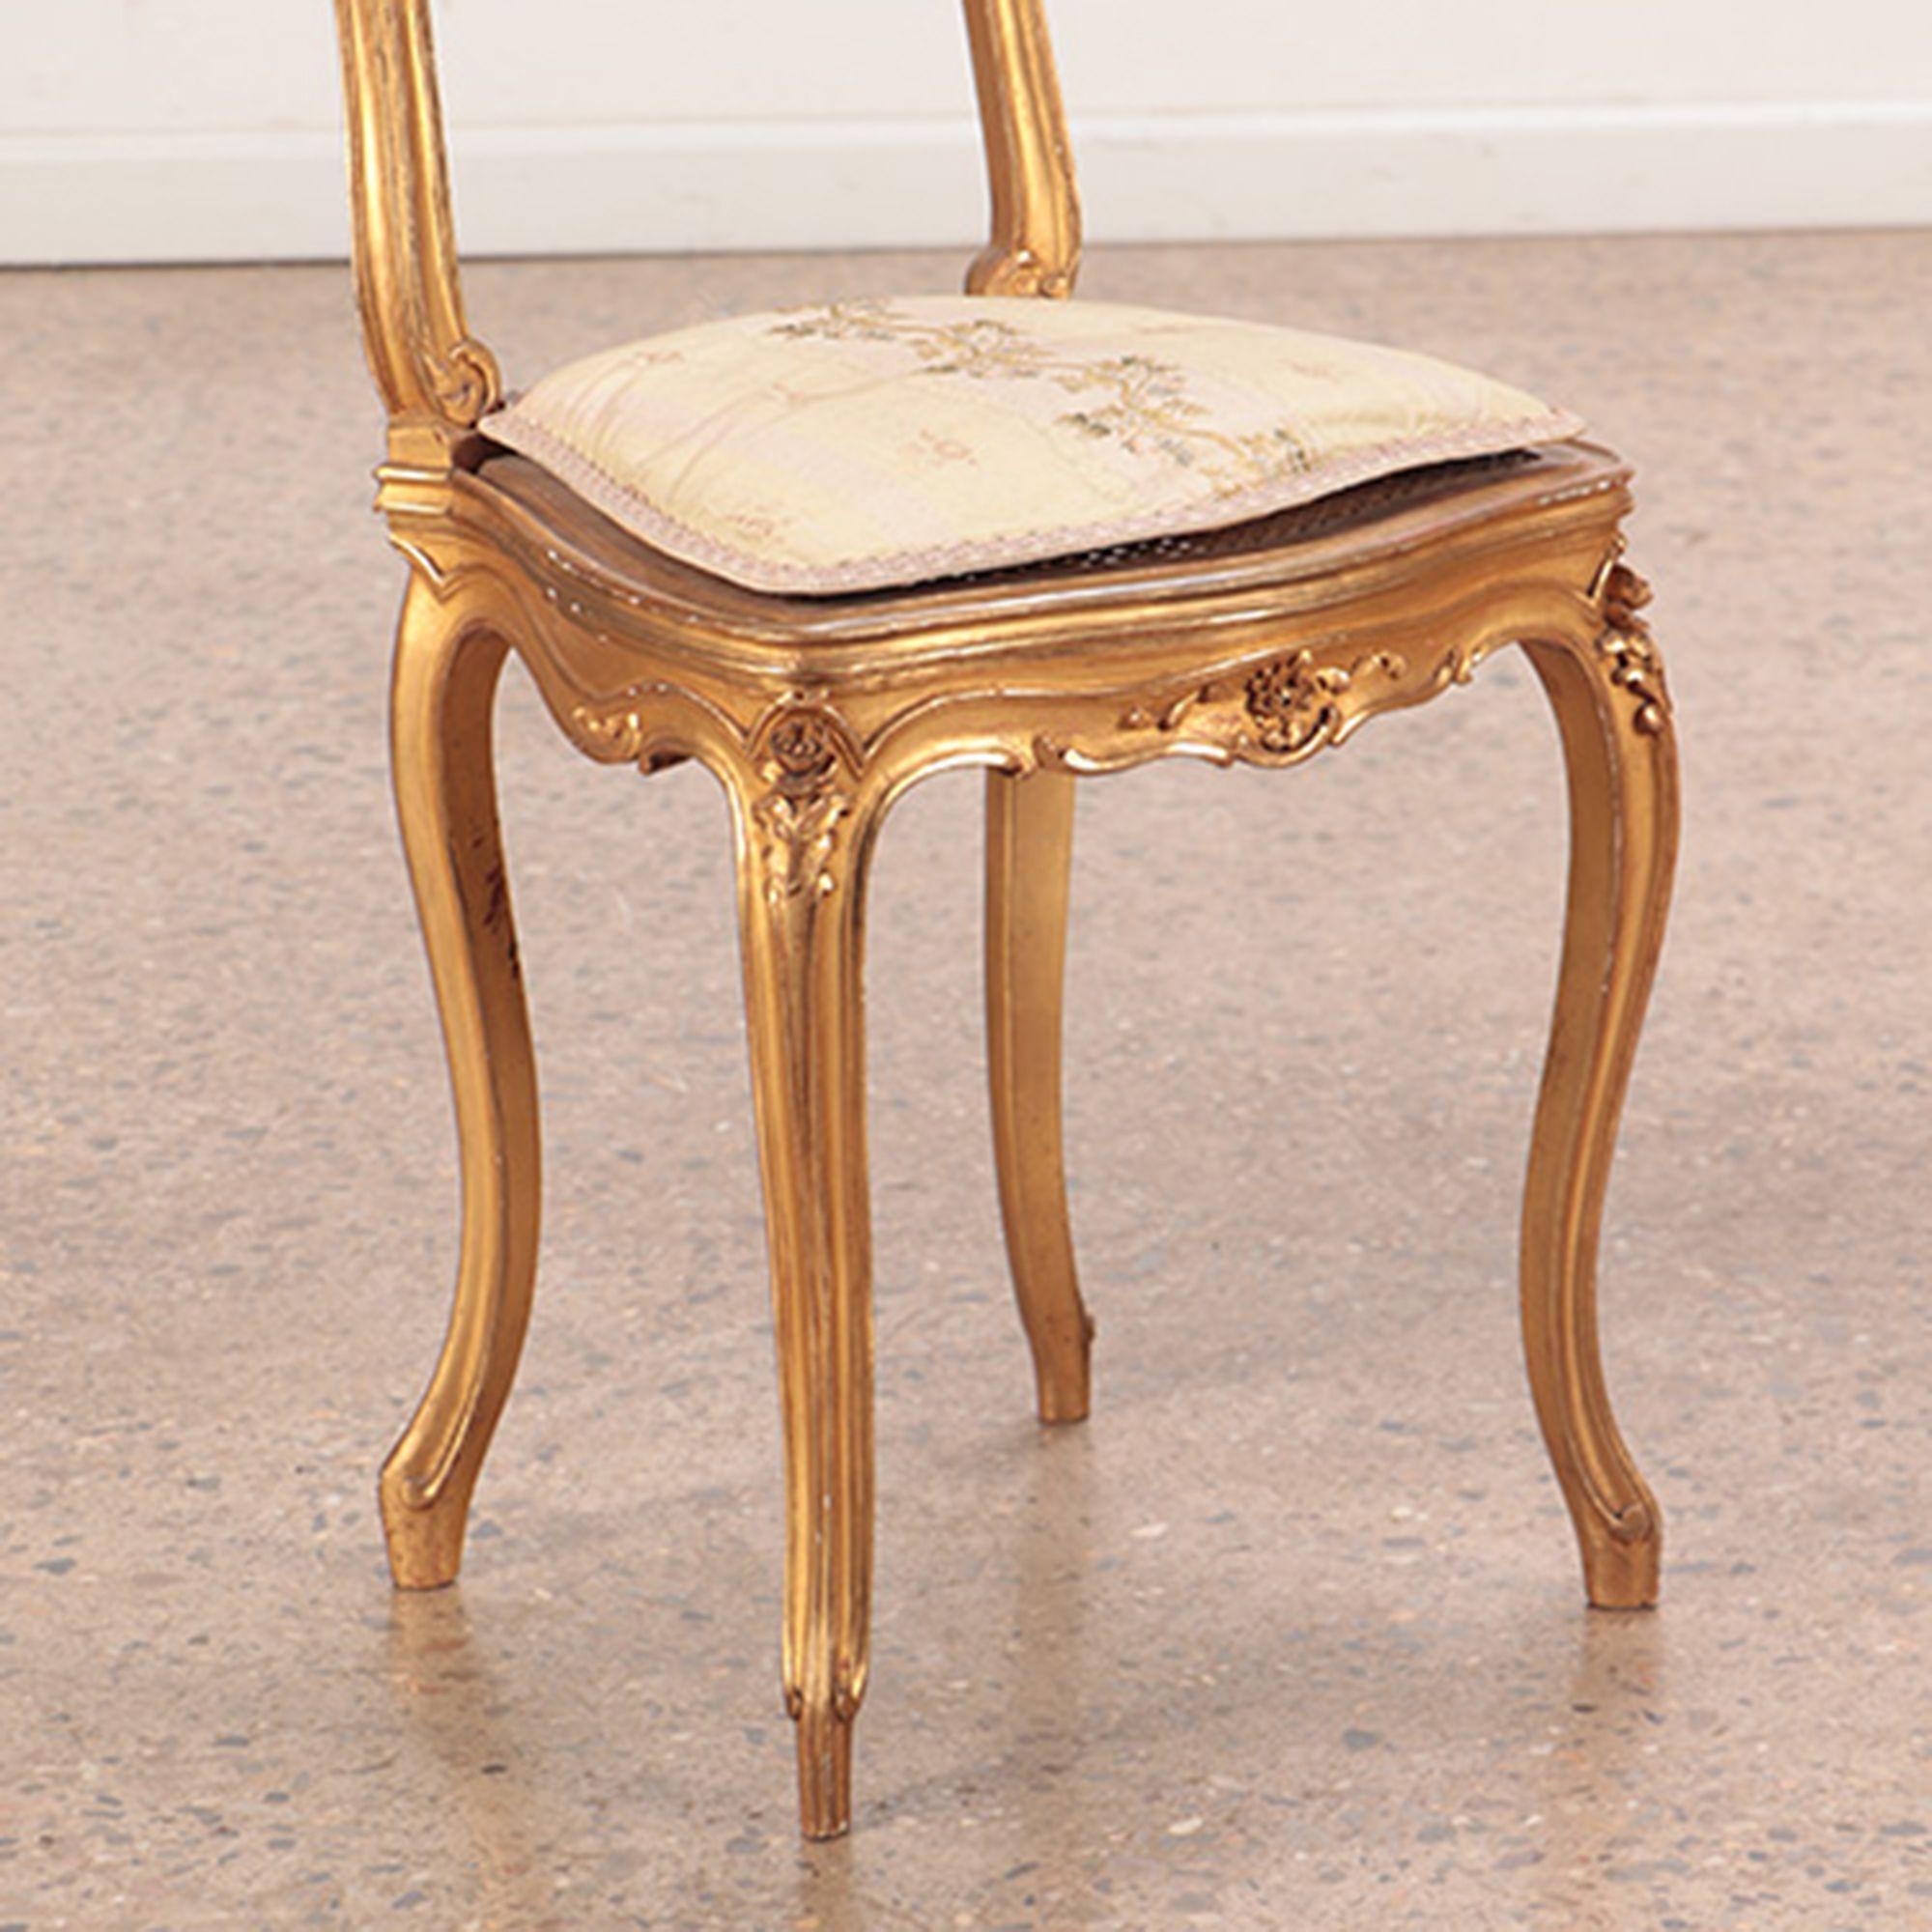 A pair of giltwood and carved French Louis XV style side chairs with original gilt finish, circa 1900.